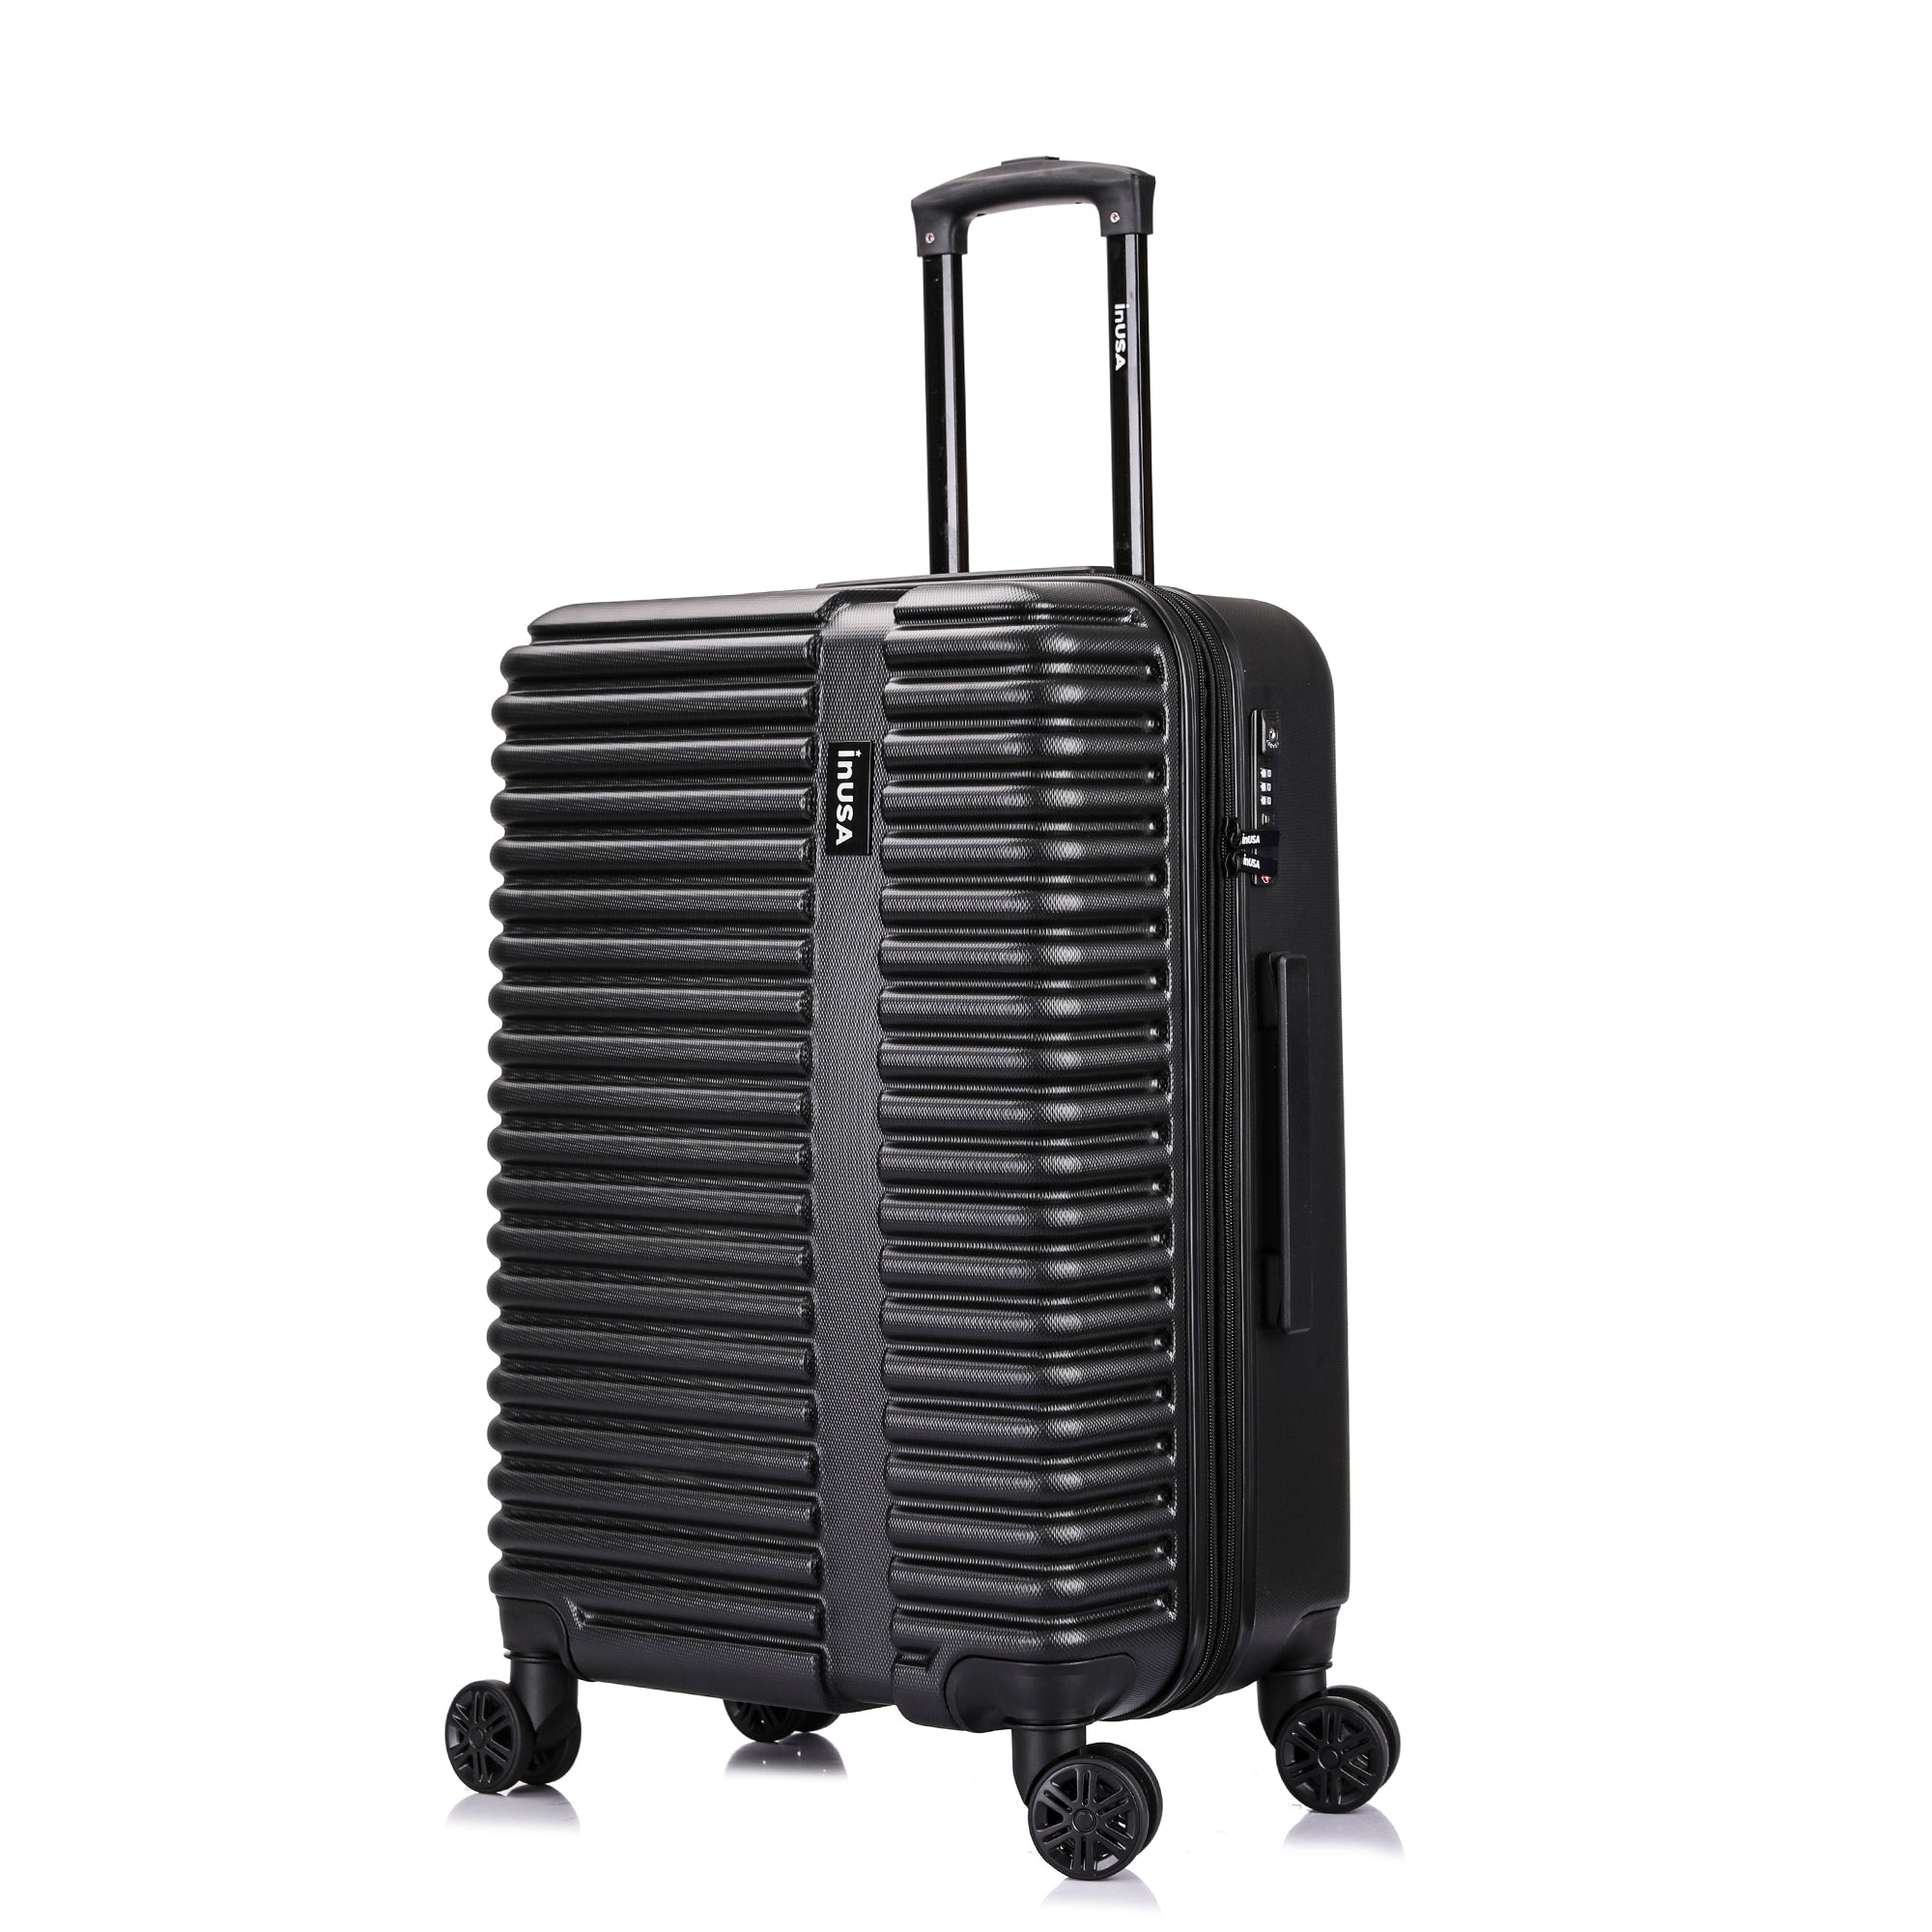 InUSA Ally 24" Hardside Lightweight Luggage with Spinner Wheels, Handle and Trolley, Black - image 1 of 9